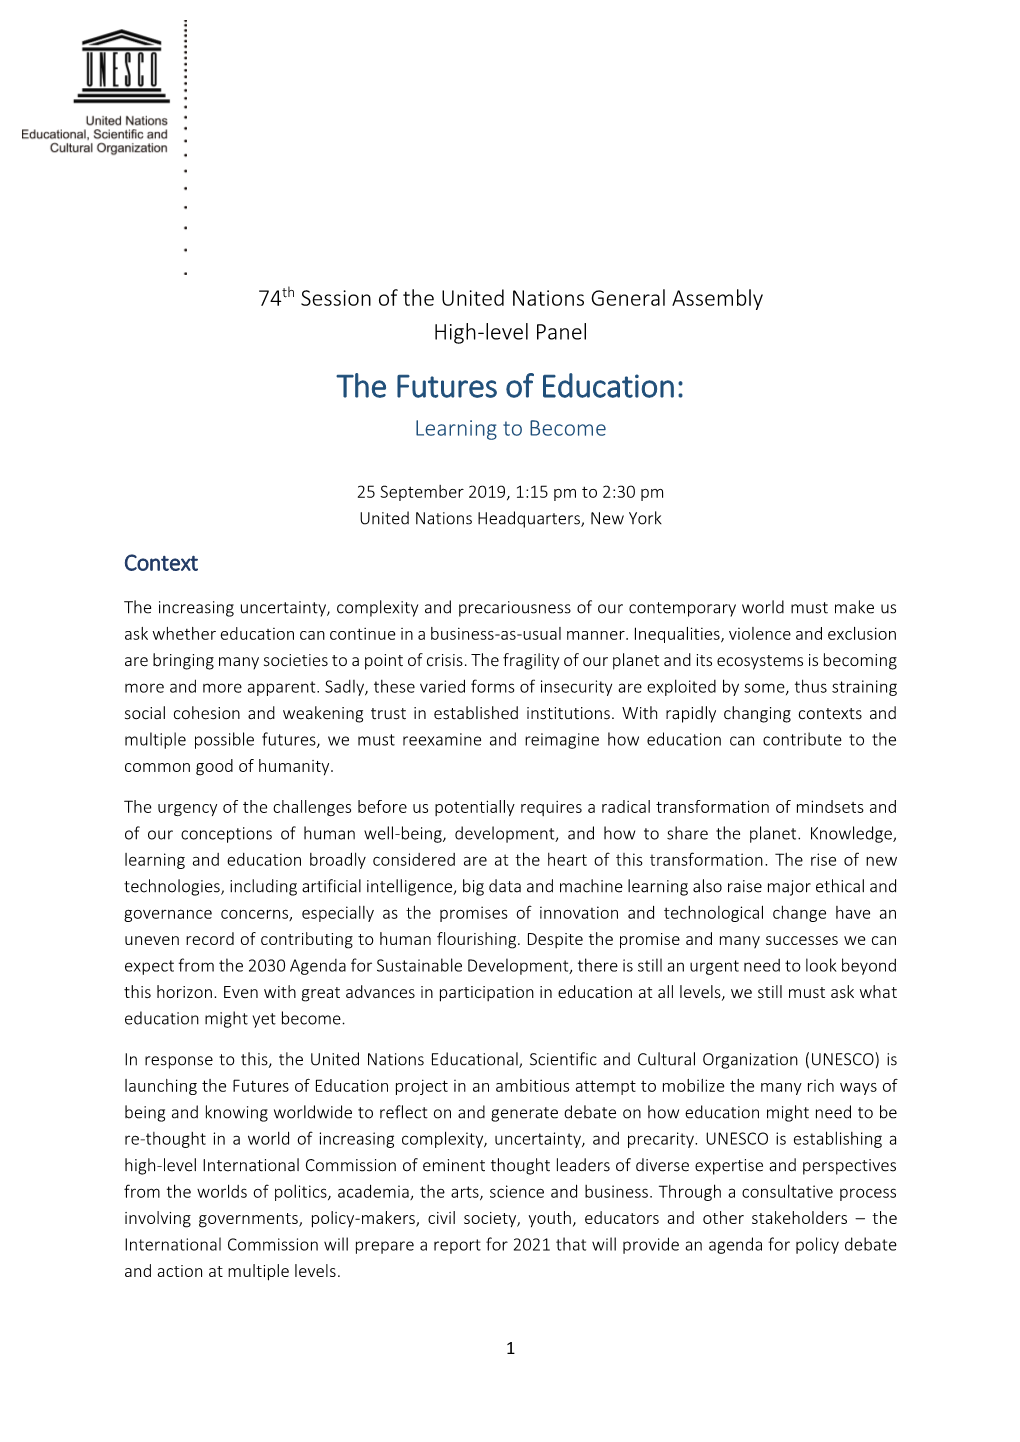 The Futures of Education: Learning to Become